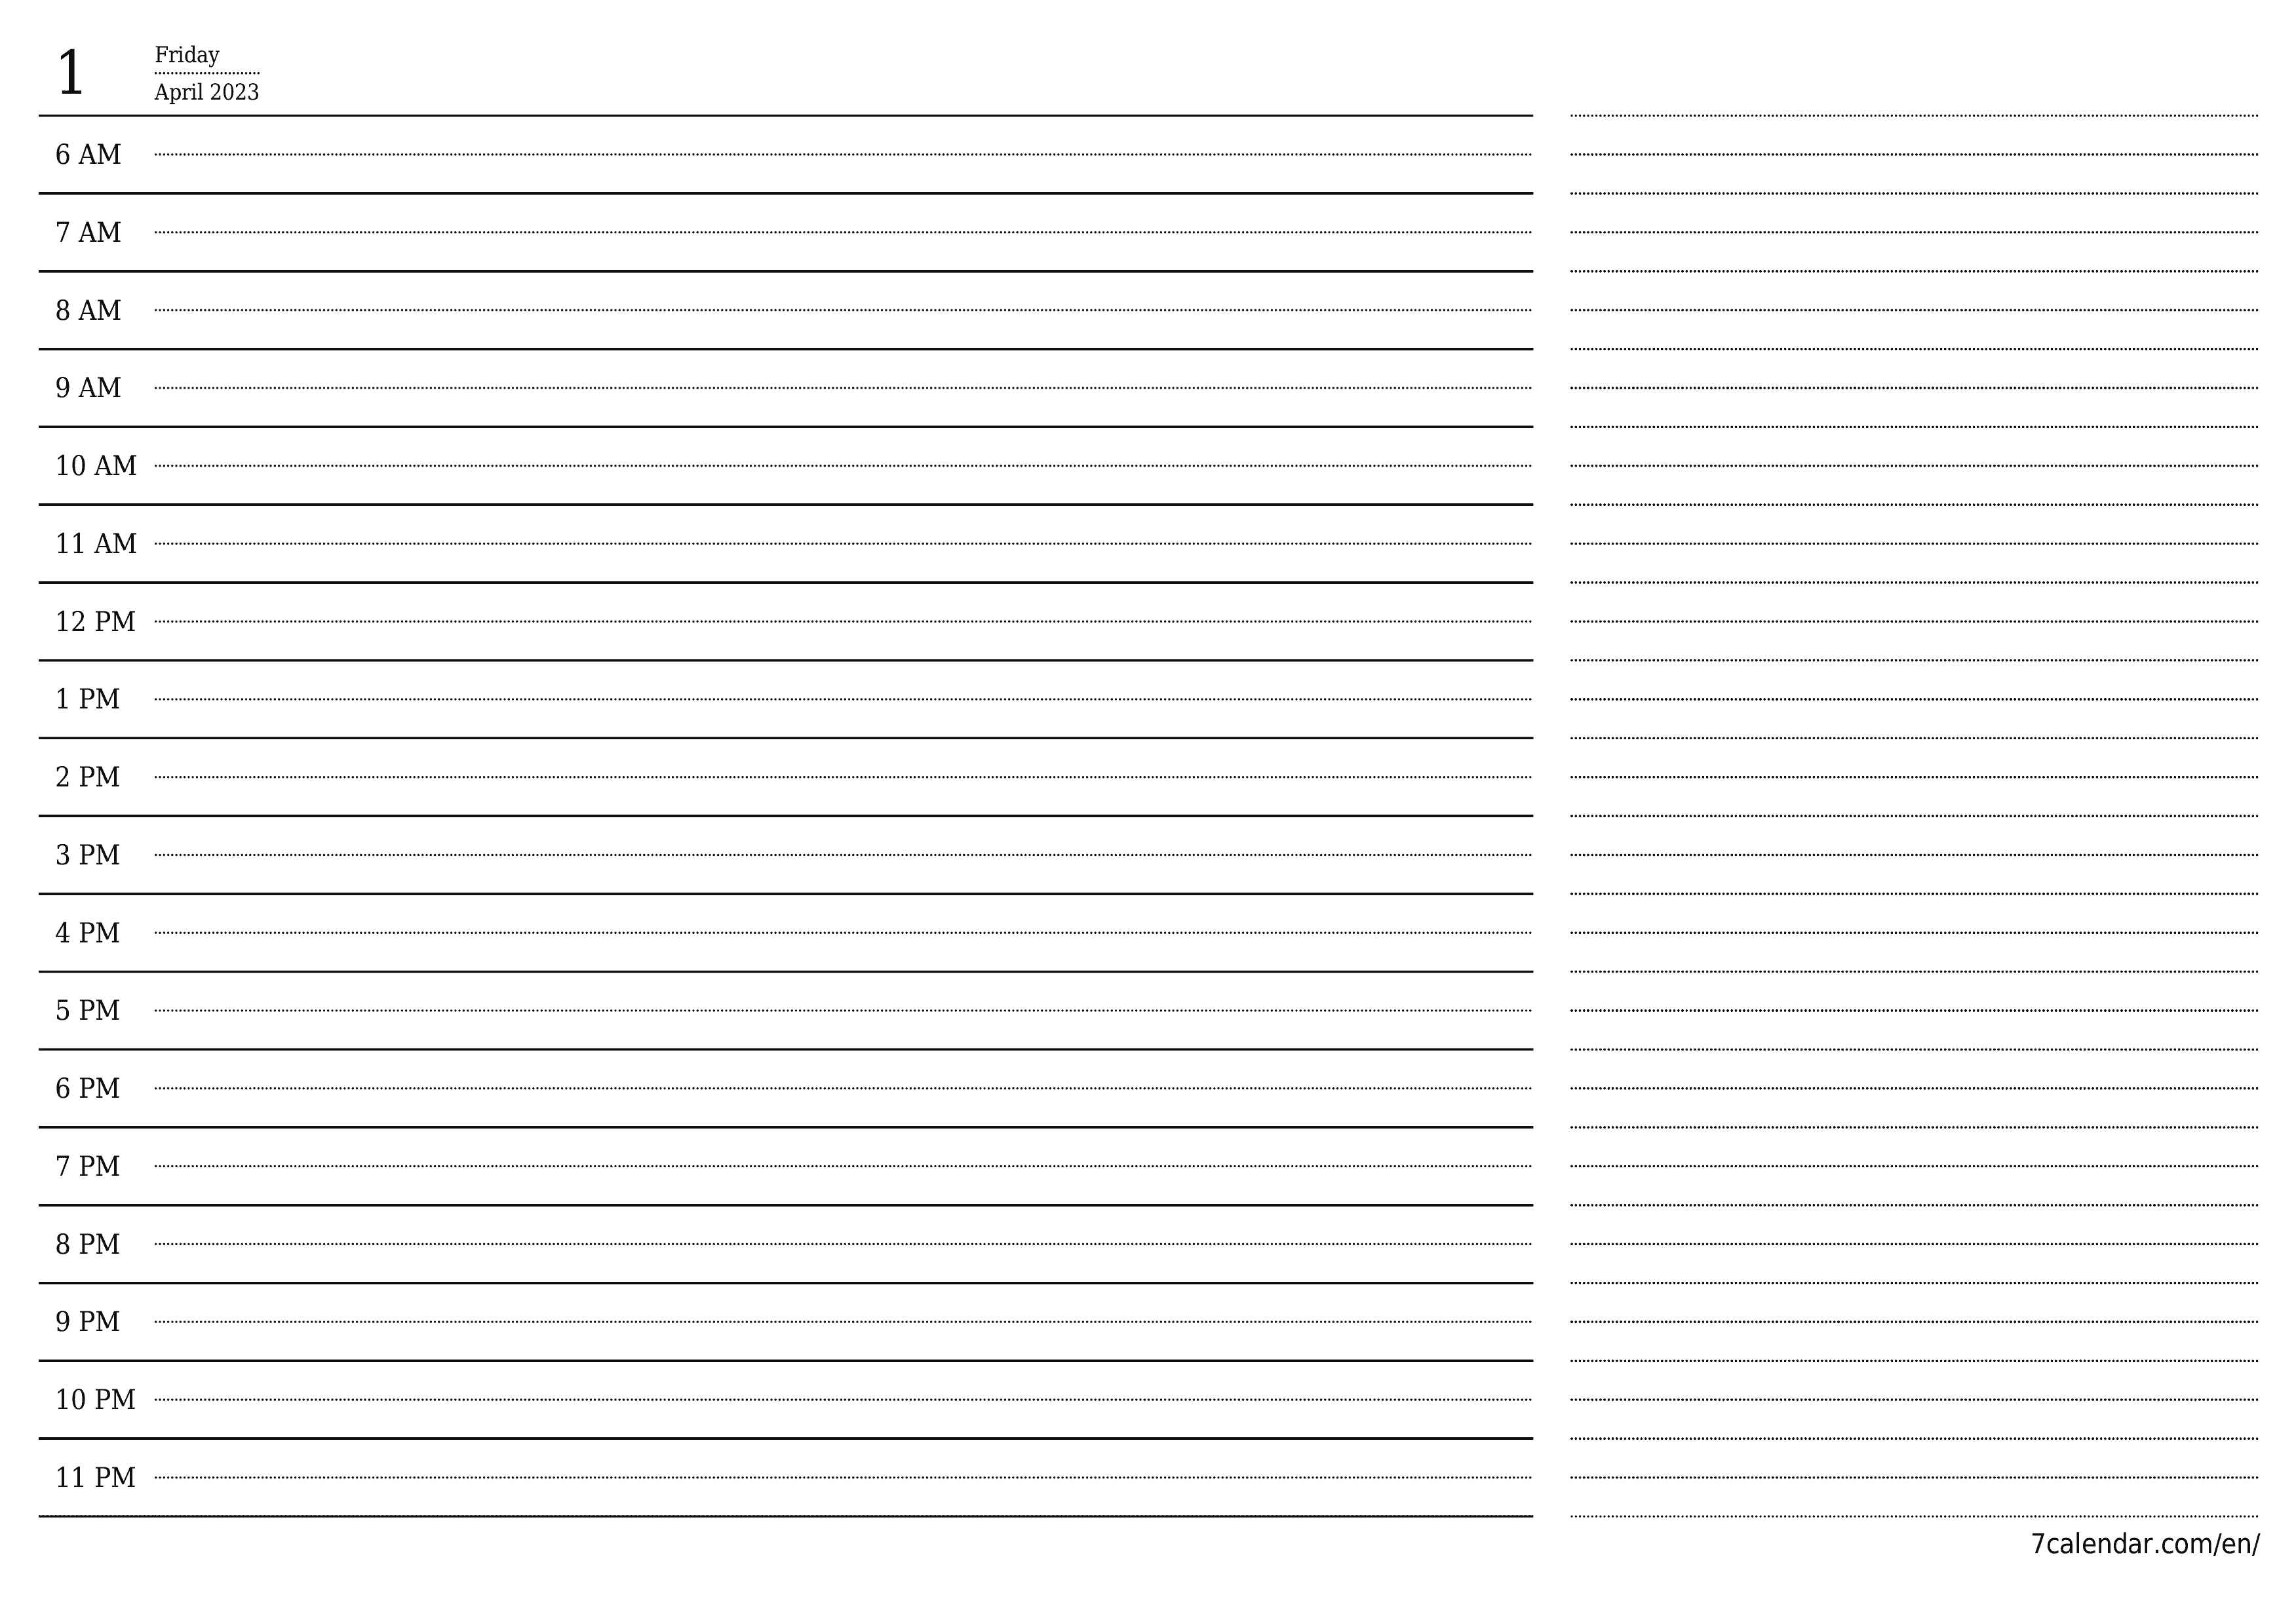 Blank daily printable calendar and planner for day April 2023 with notes, save and print to PDF PNG English